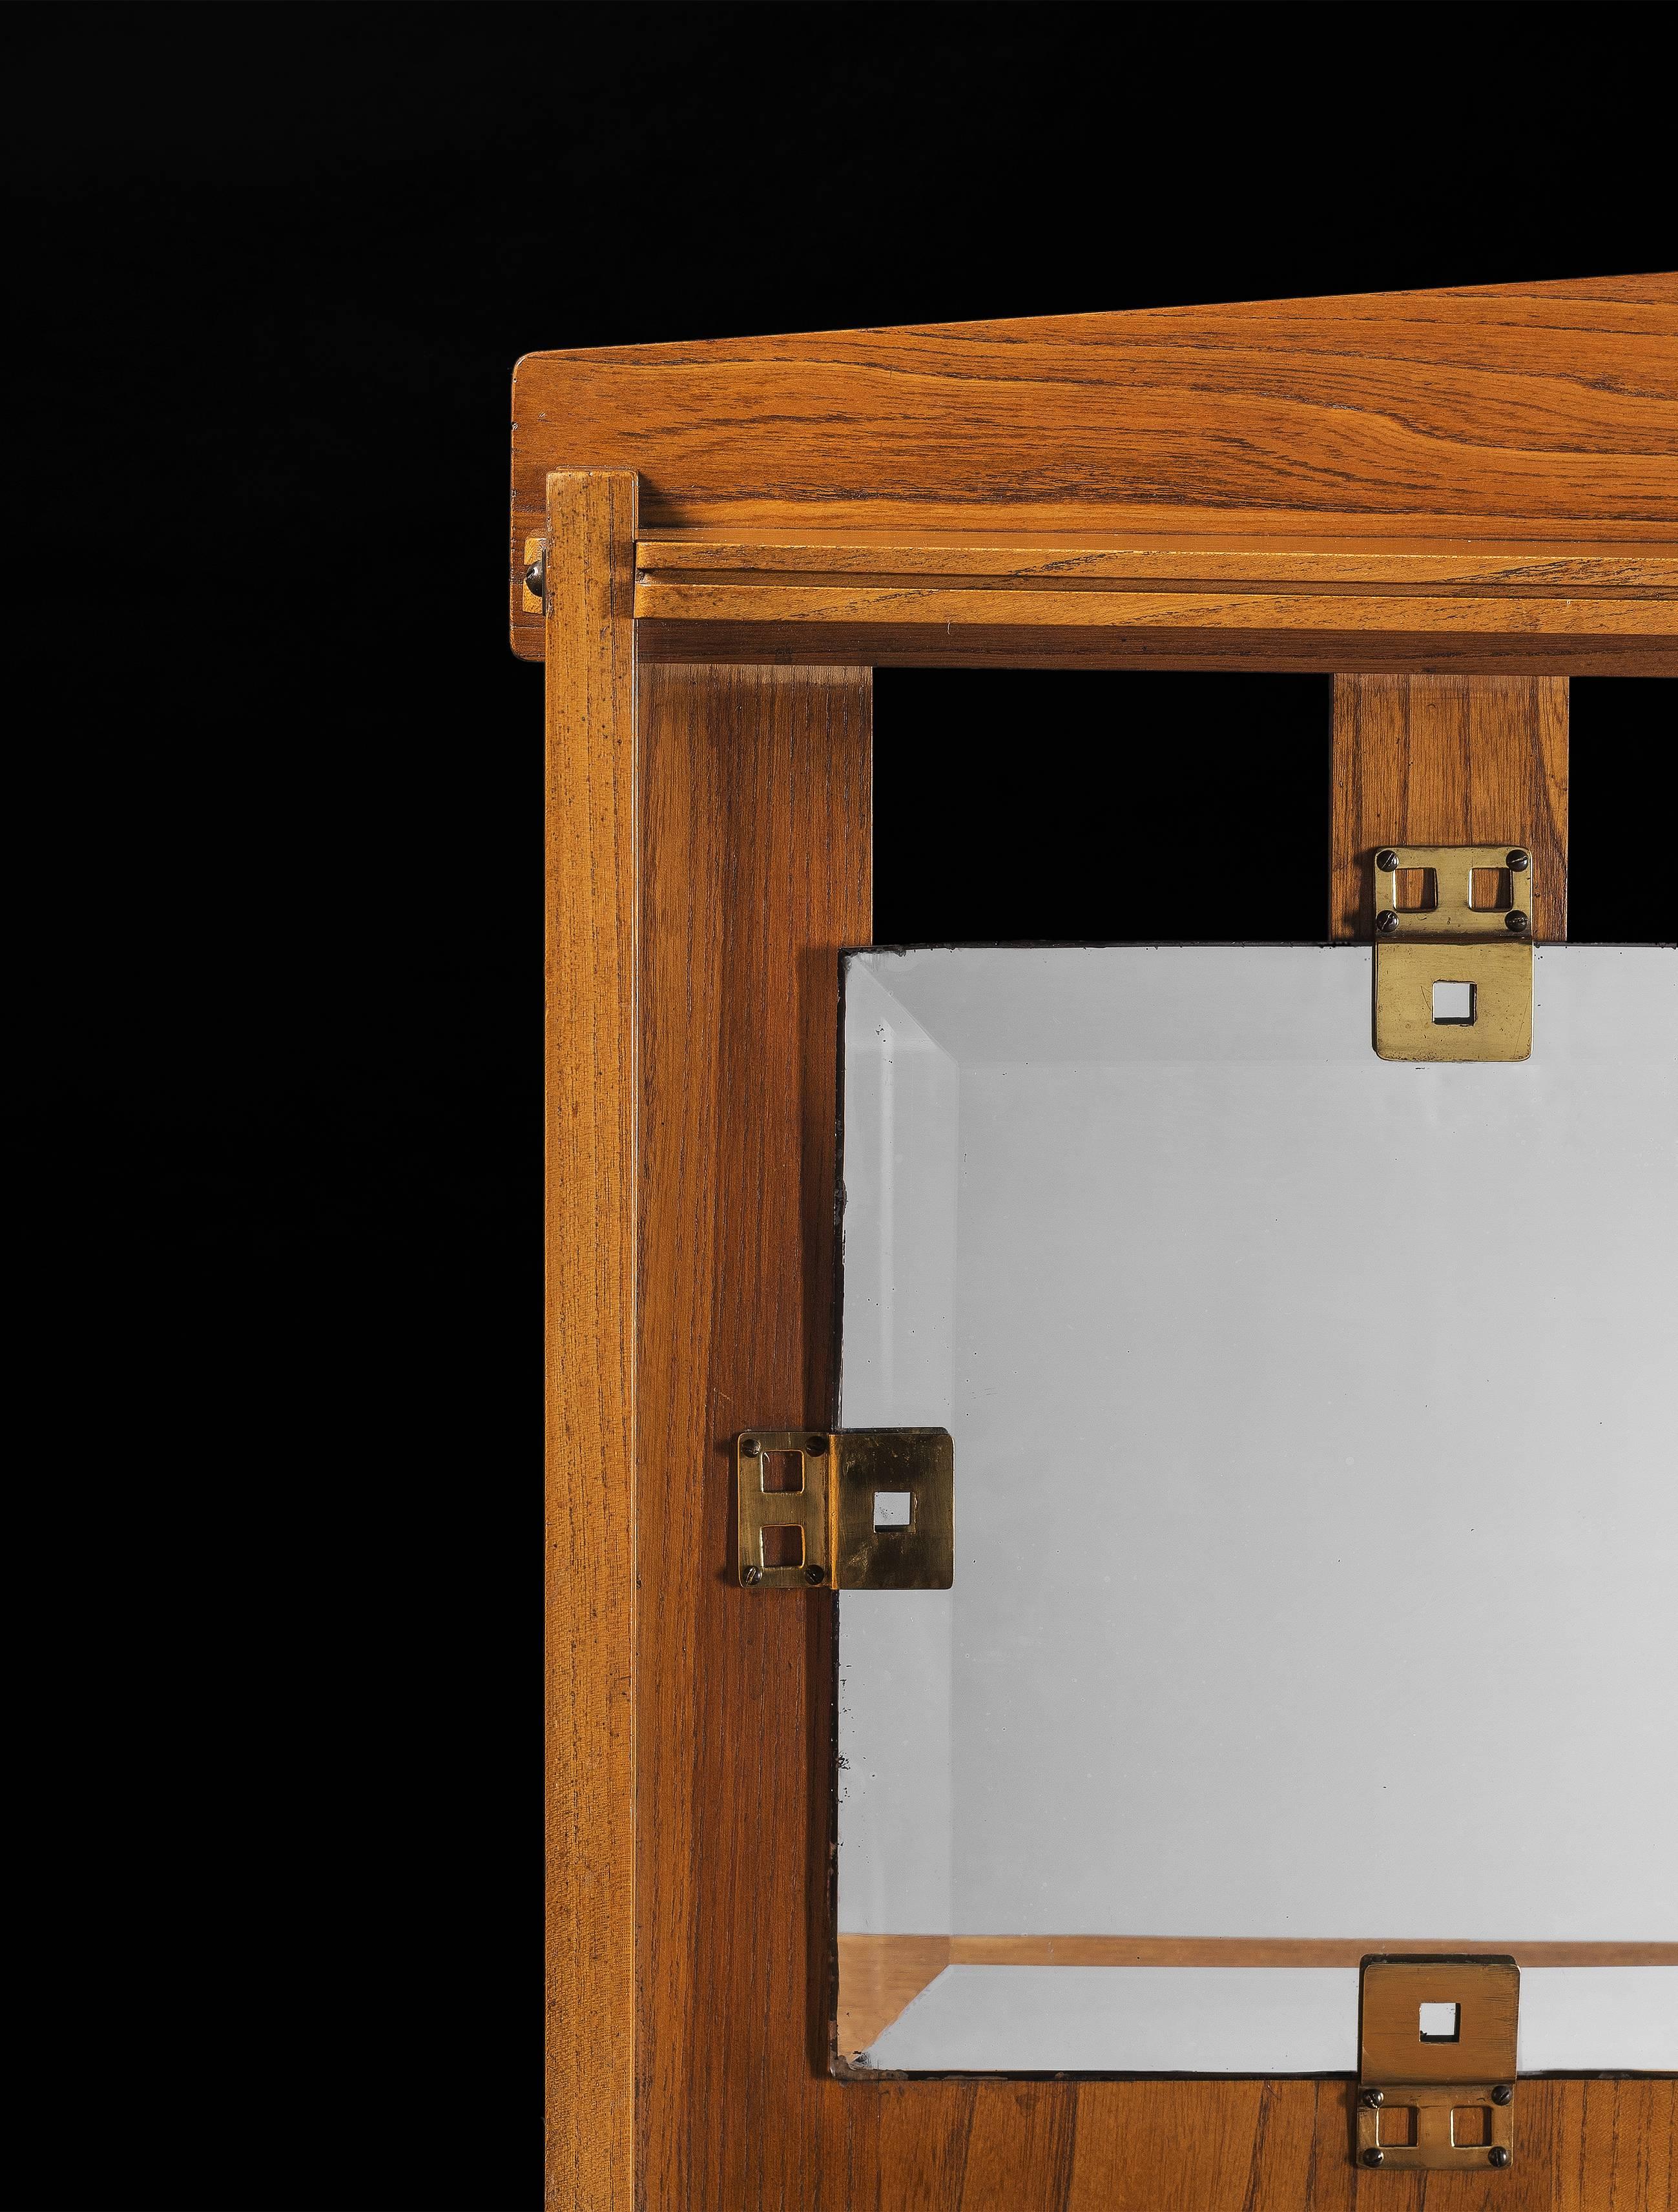 Small Side Cabinet by Gustave Serrurier-Bovy, made by the company Serrurier & Co in 1906. 